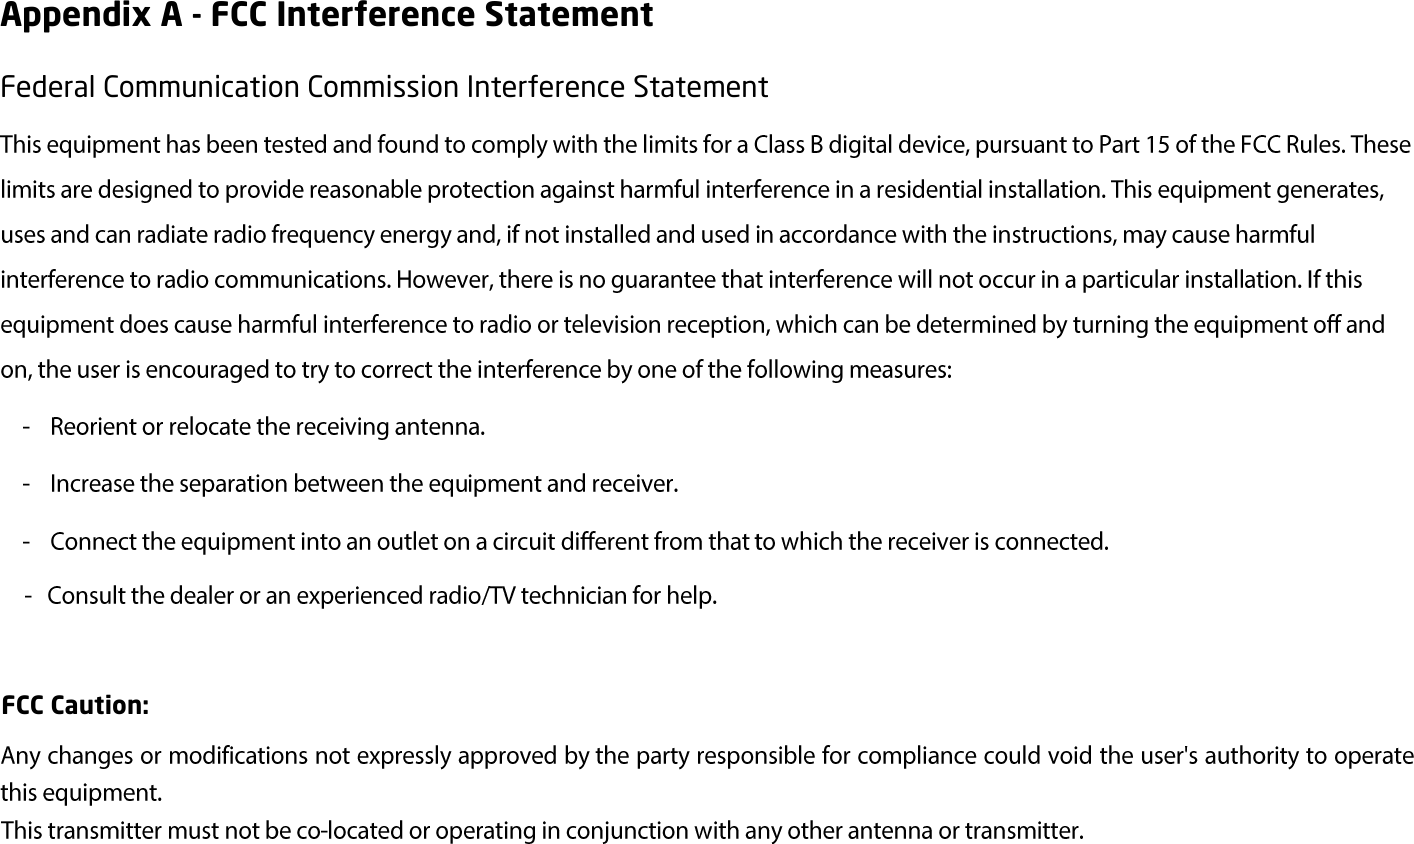 Appendix A - FCC Interference Statement Federal Communication Commission Interference Statement FCC Caution:   